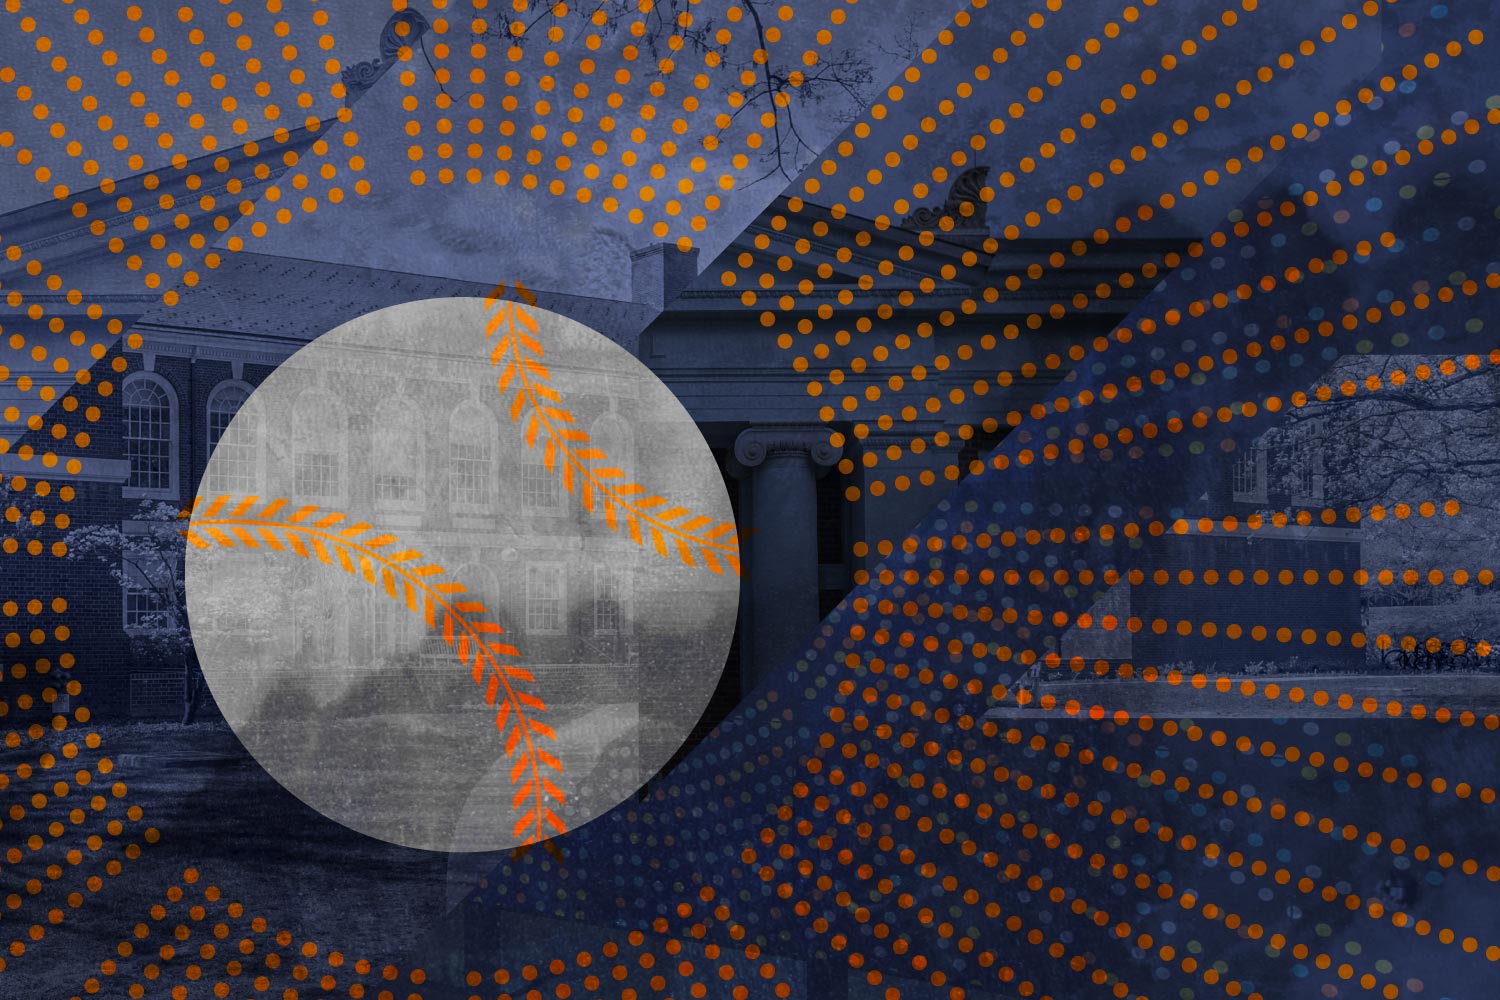 Illustration of a baseball overlaid on top of a UVA building